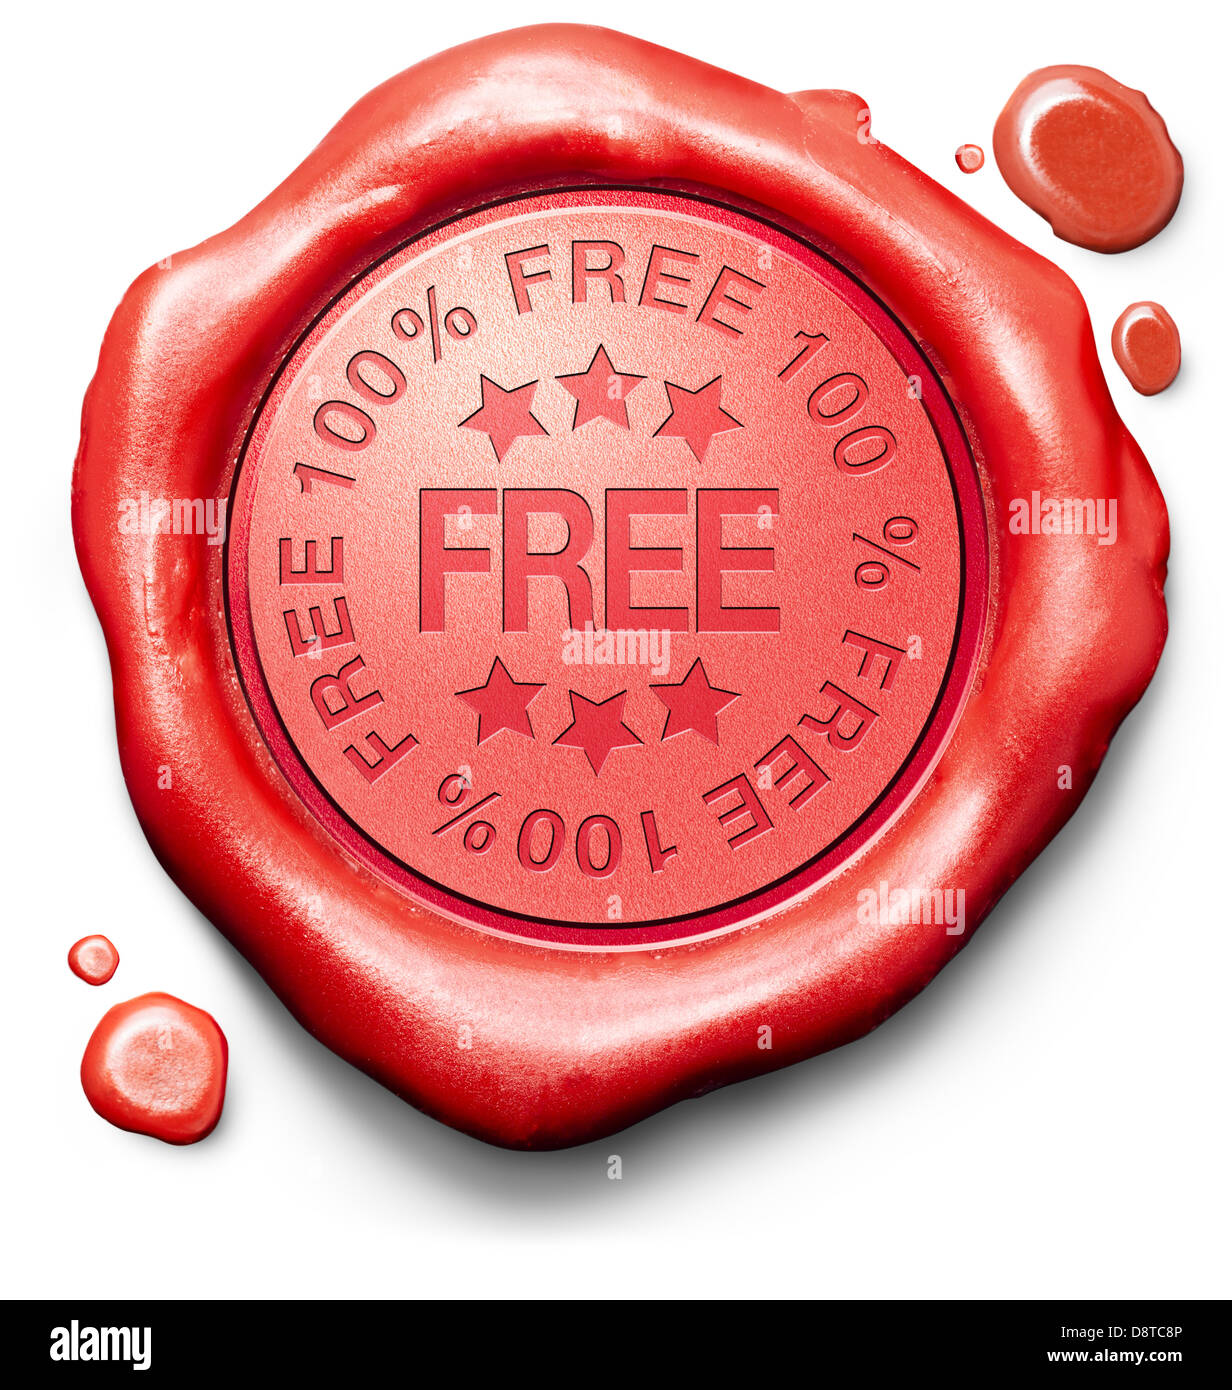 free of charge 100% gratis extra bonus icon red wax seal stamp for product promotion sample Stock Photo